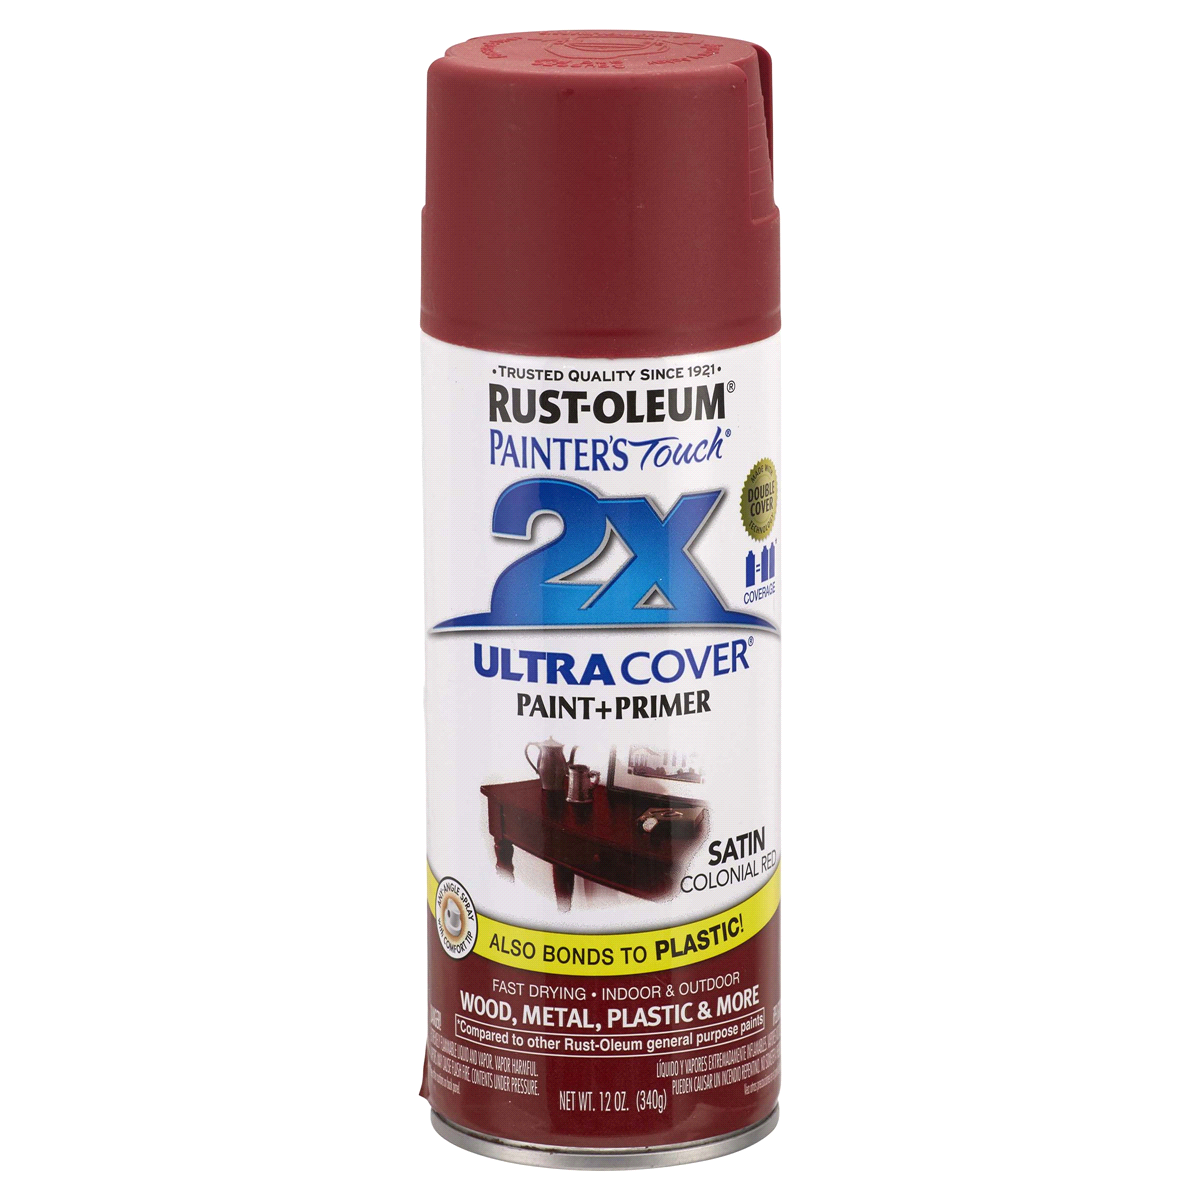 slide 1 of 1, Rust-Oleum Painters Touch 2x Ultra Cover Spray Paint 249082, Satin Colonial Red, 12 oz